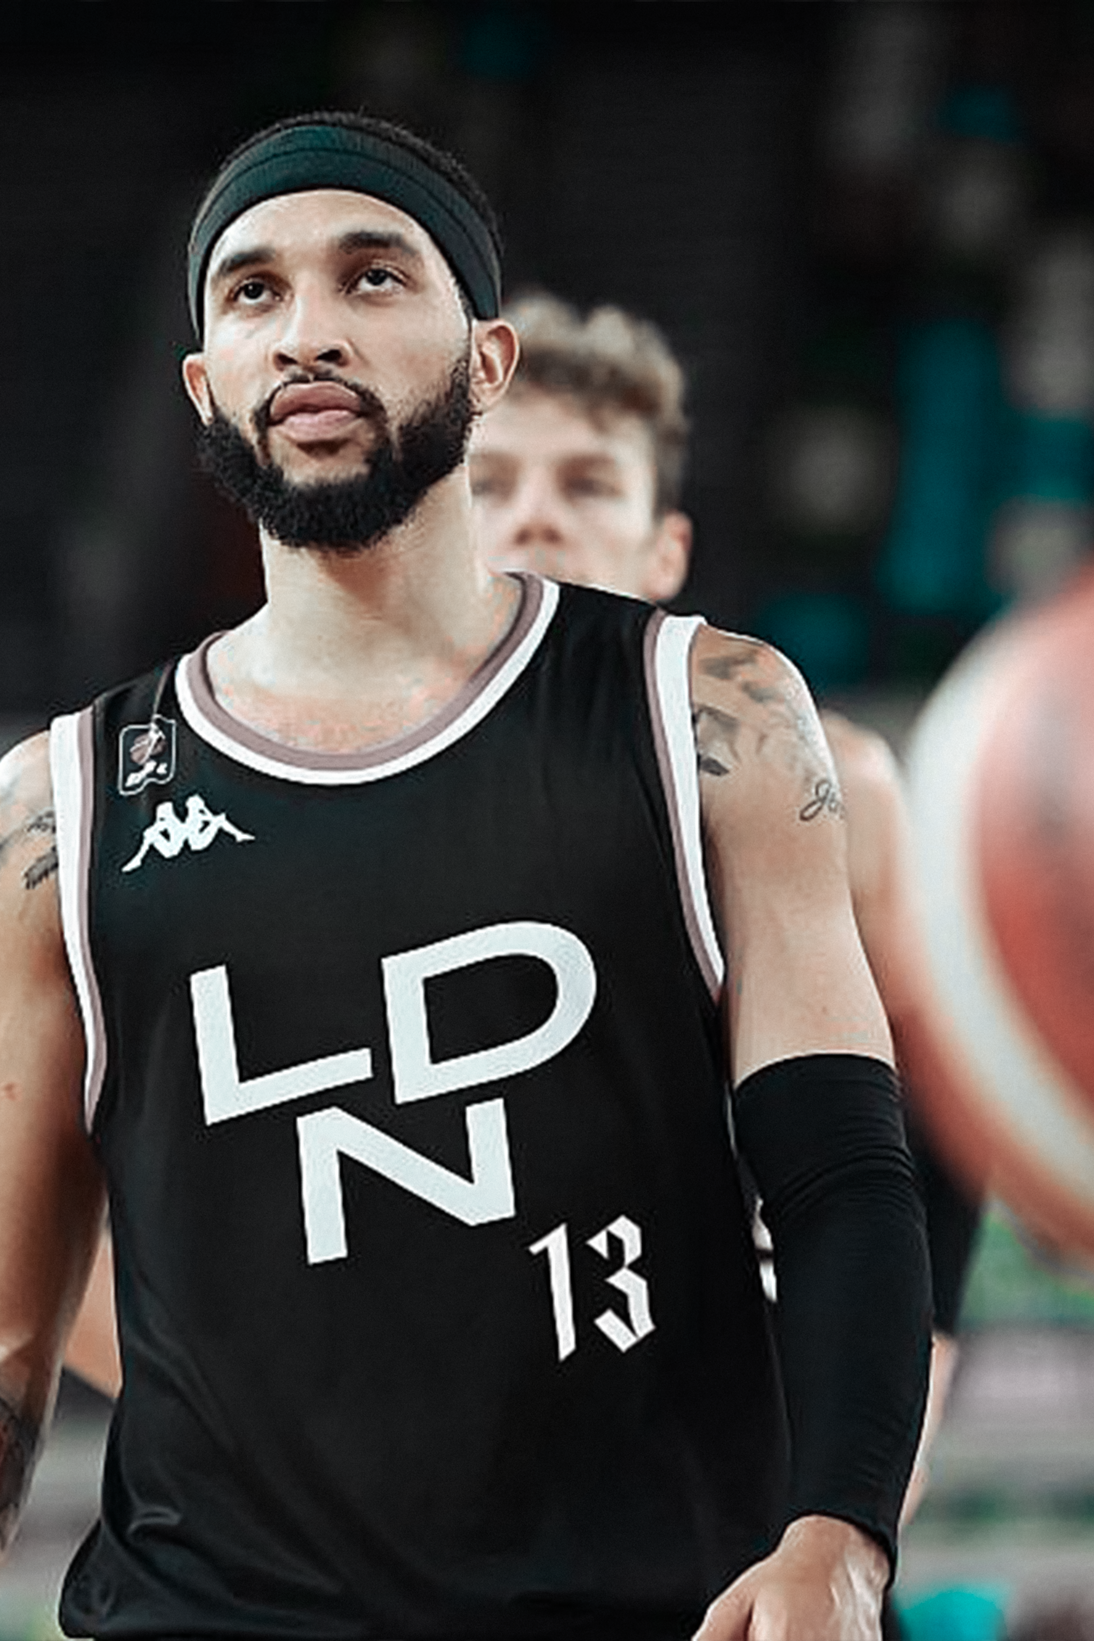 London Lions player 13 (ISAIAH REESE)